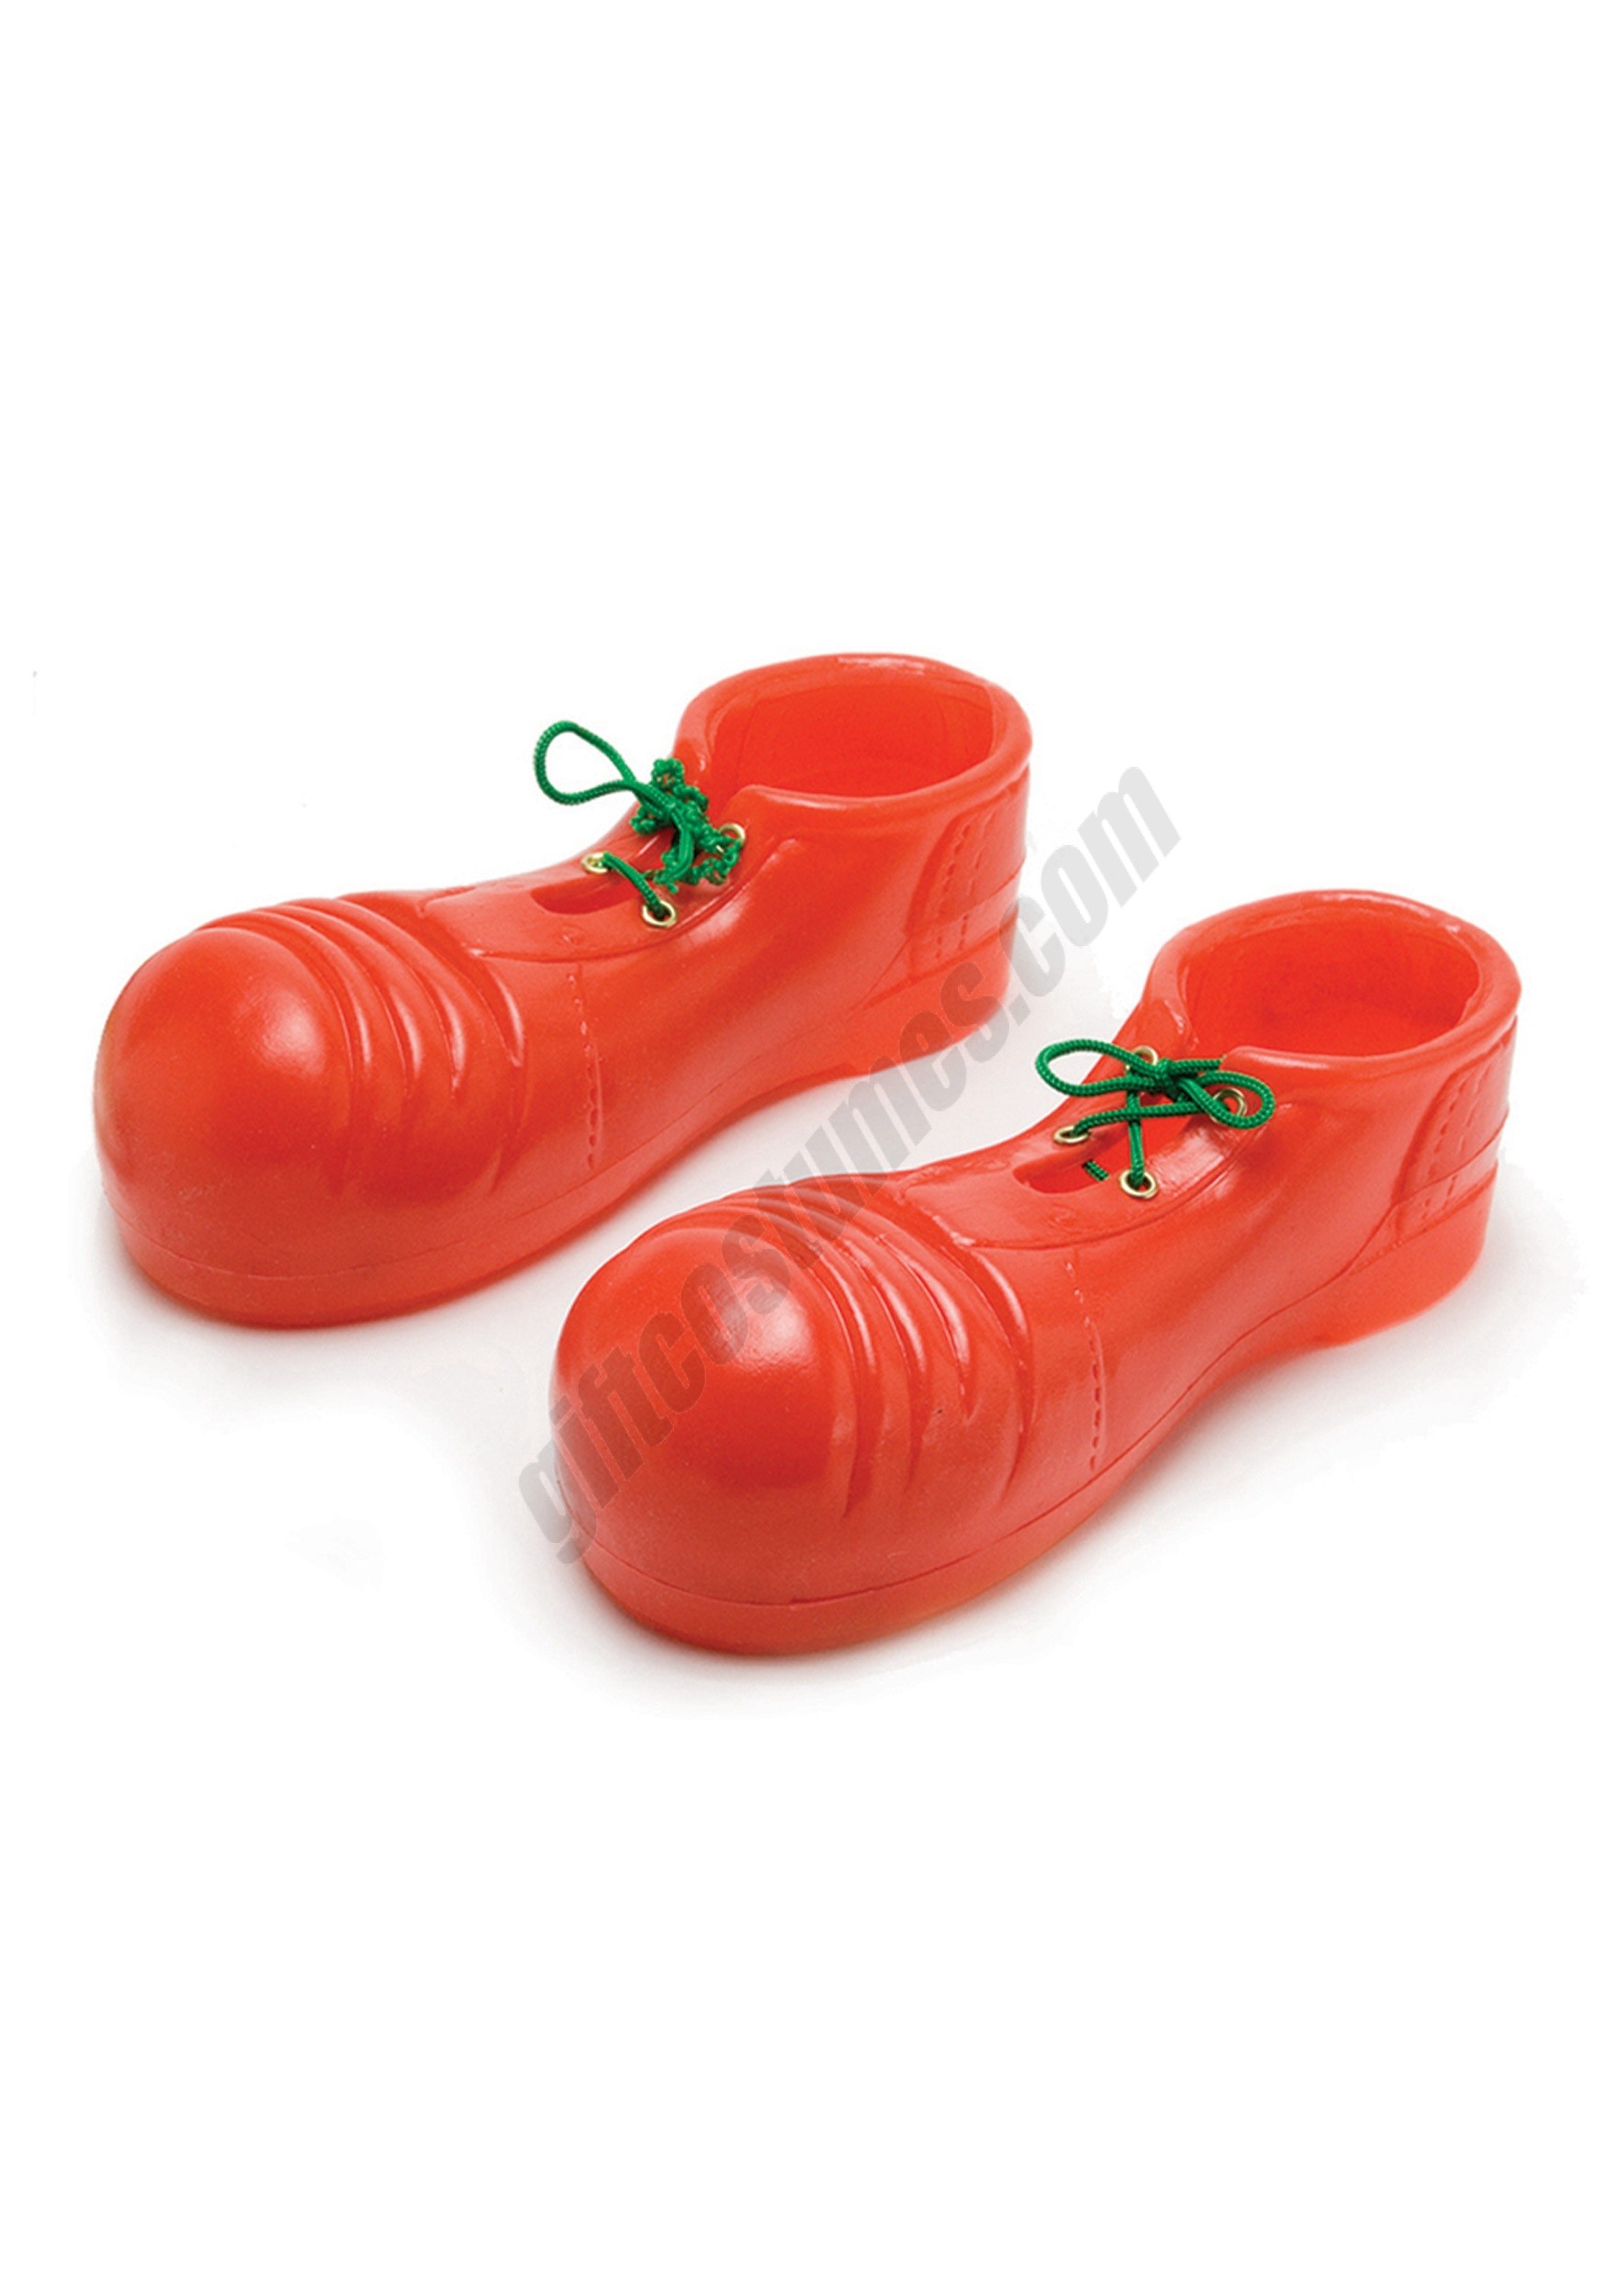 Adult Clunker Clown Shoes Promotions - Adult Clunker Clown Shoes Promotions